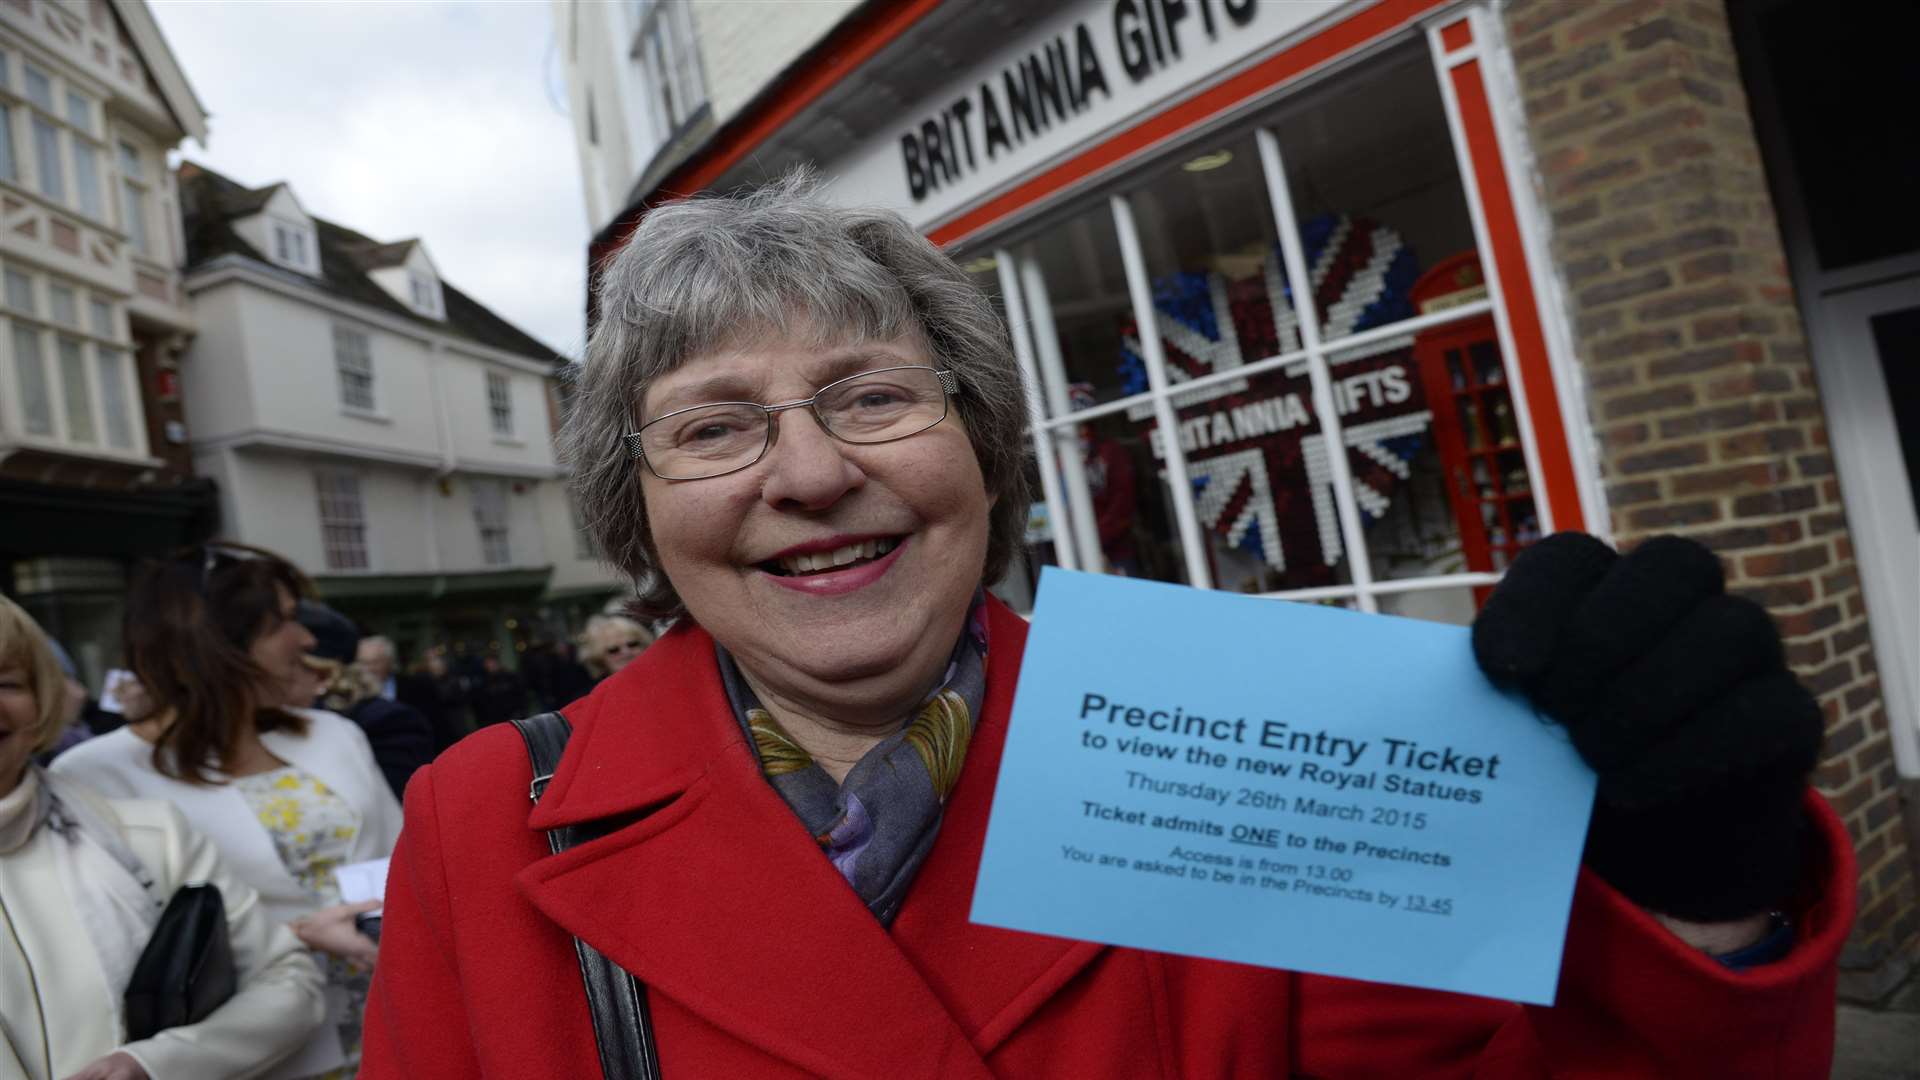 Merle Brown was lucky enough to get a ticket into the Cathedral precincts for the Queen's visit